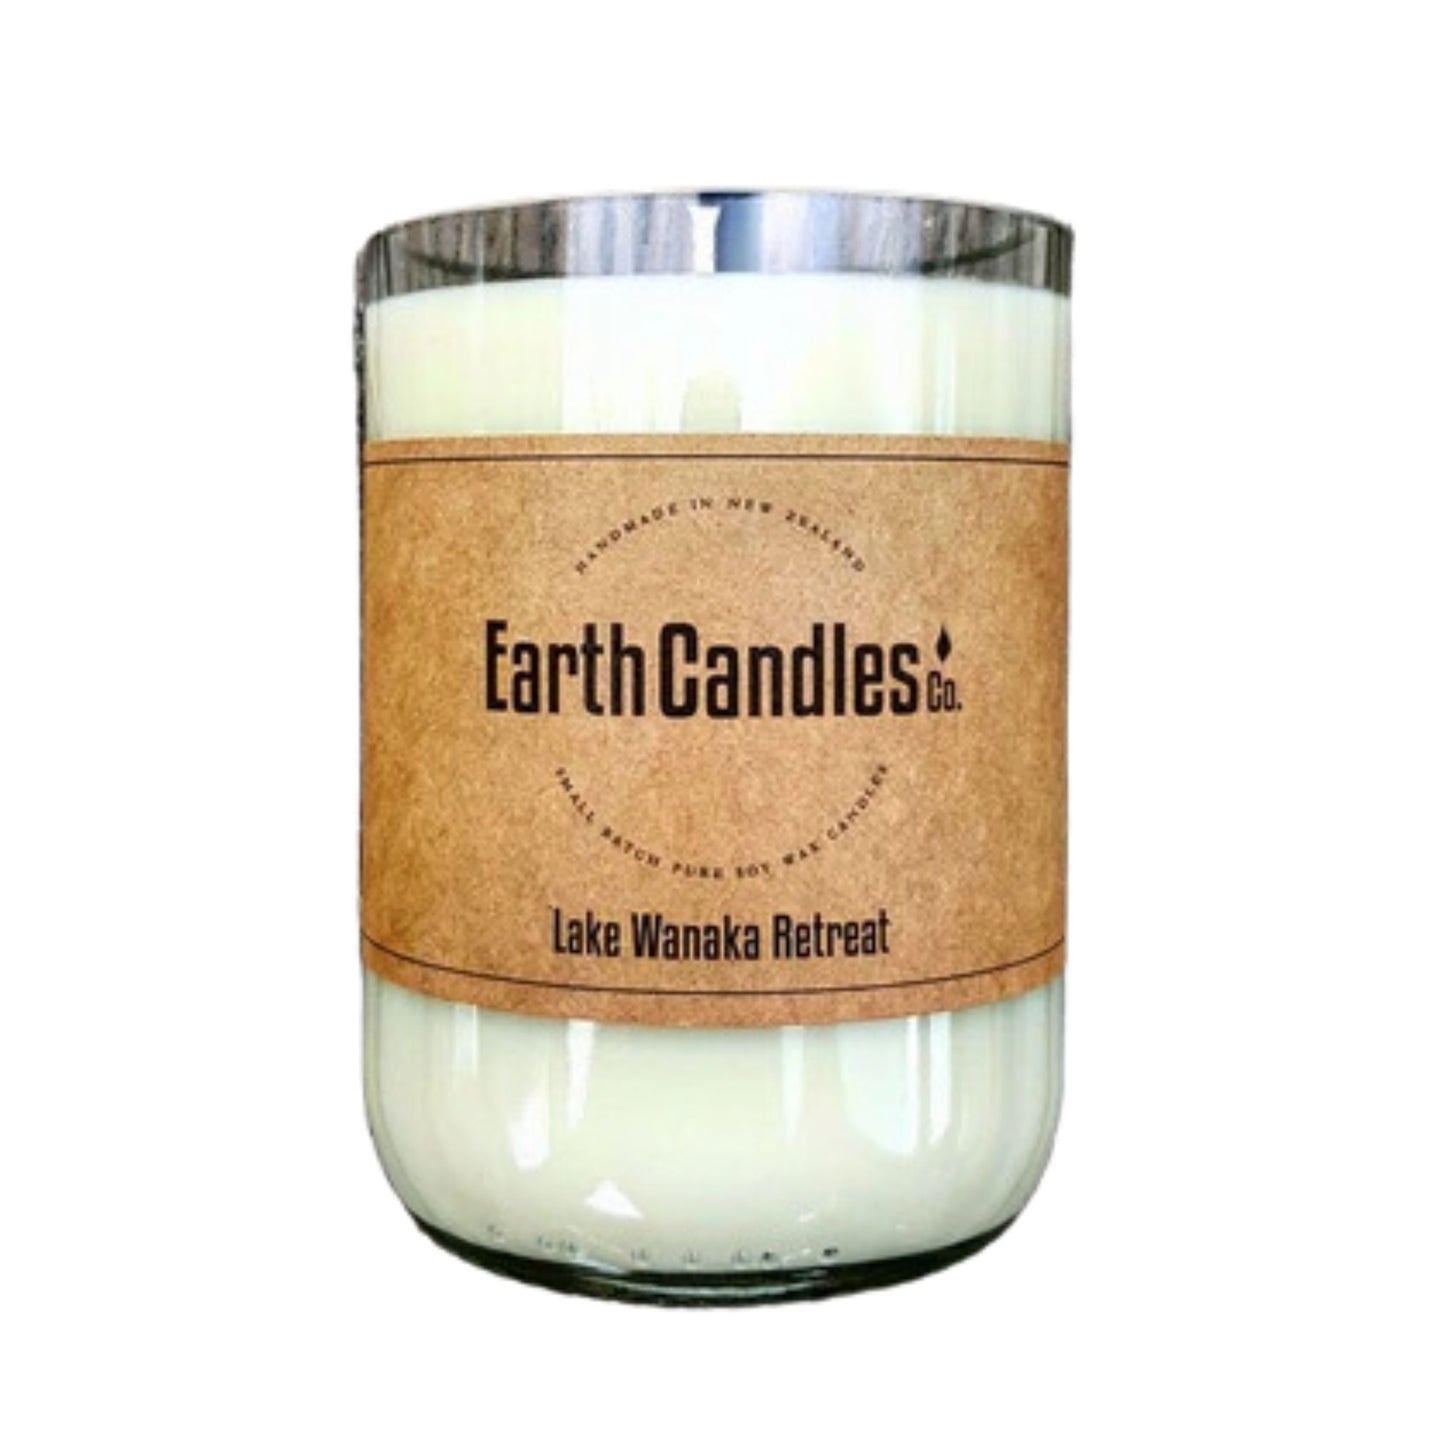 Lake Wanaka Retreat Soy Candle from Earth candles. Proudly made in New Zealand from re purposed bottles. This one is 360 grams